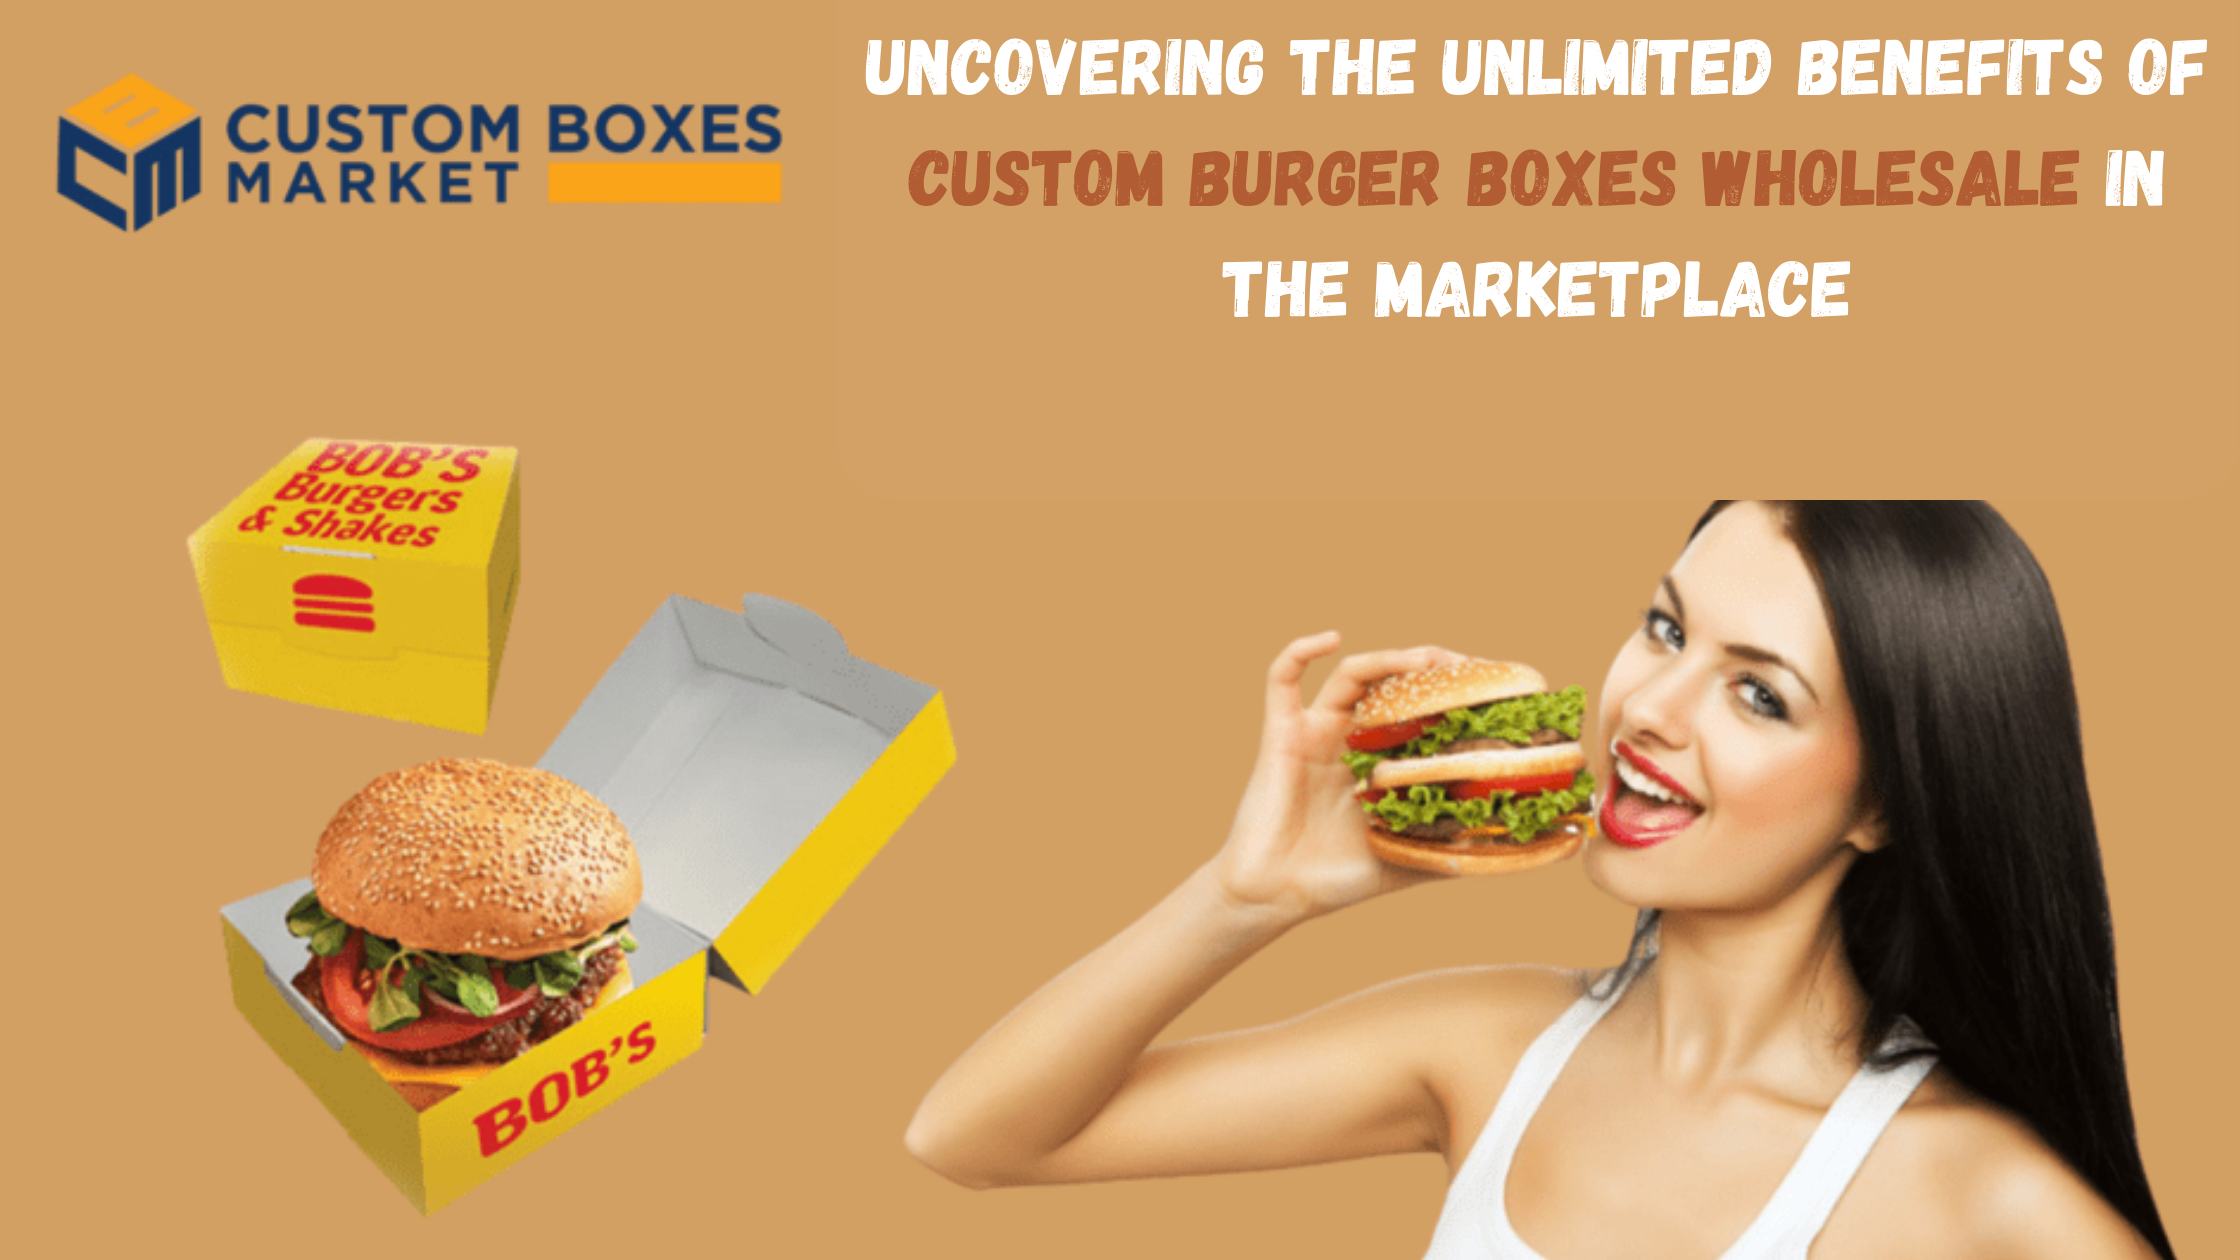 Uncovering The Unlimited Benefits of Custom Burger Boxes Wholesale In The Marketplace For Your Business